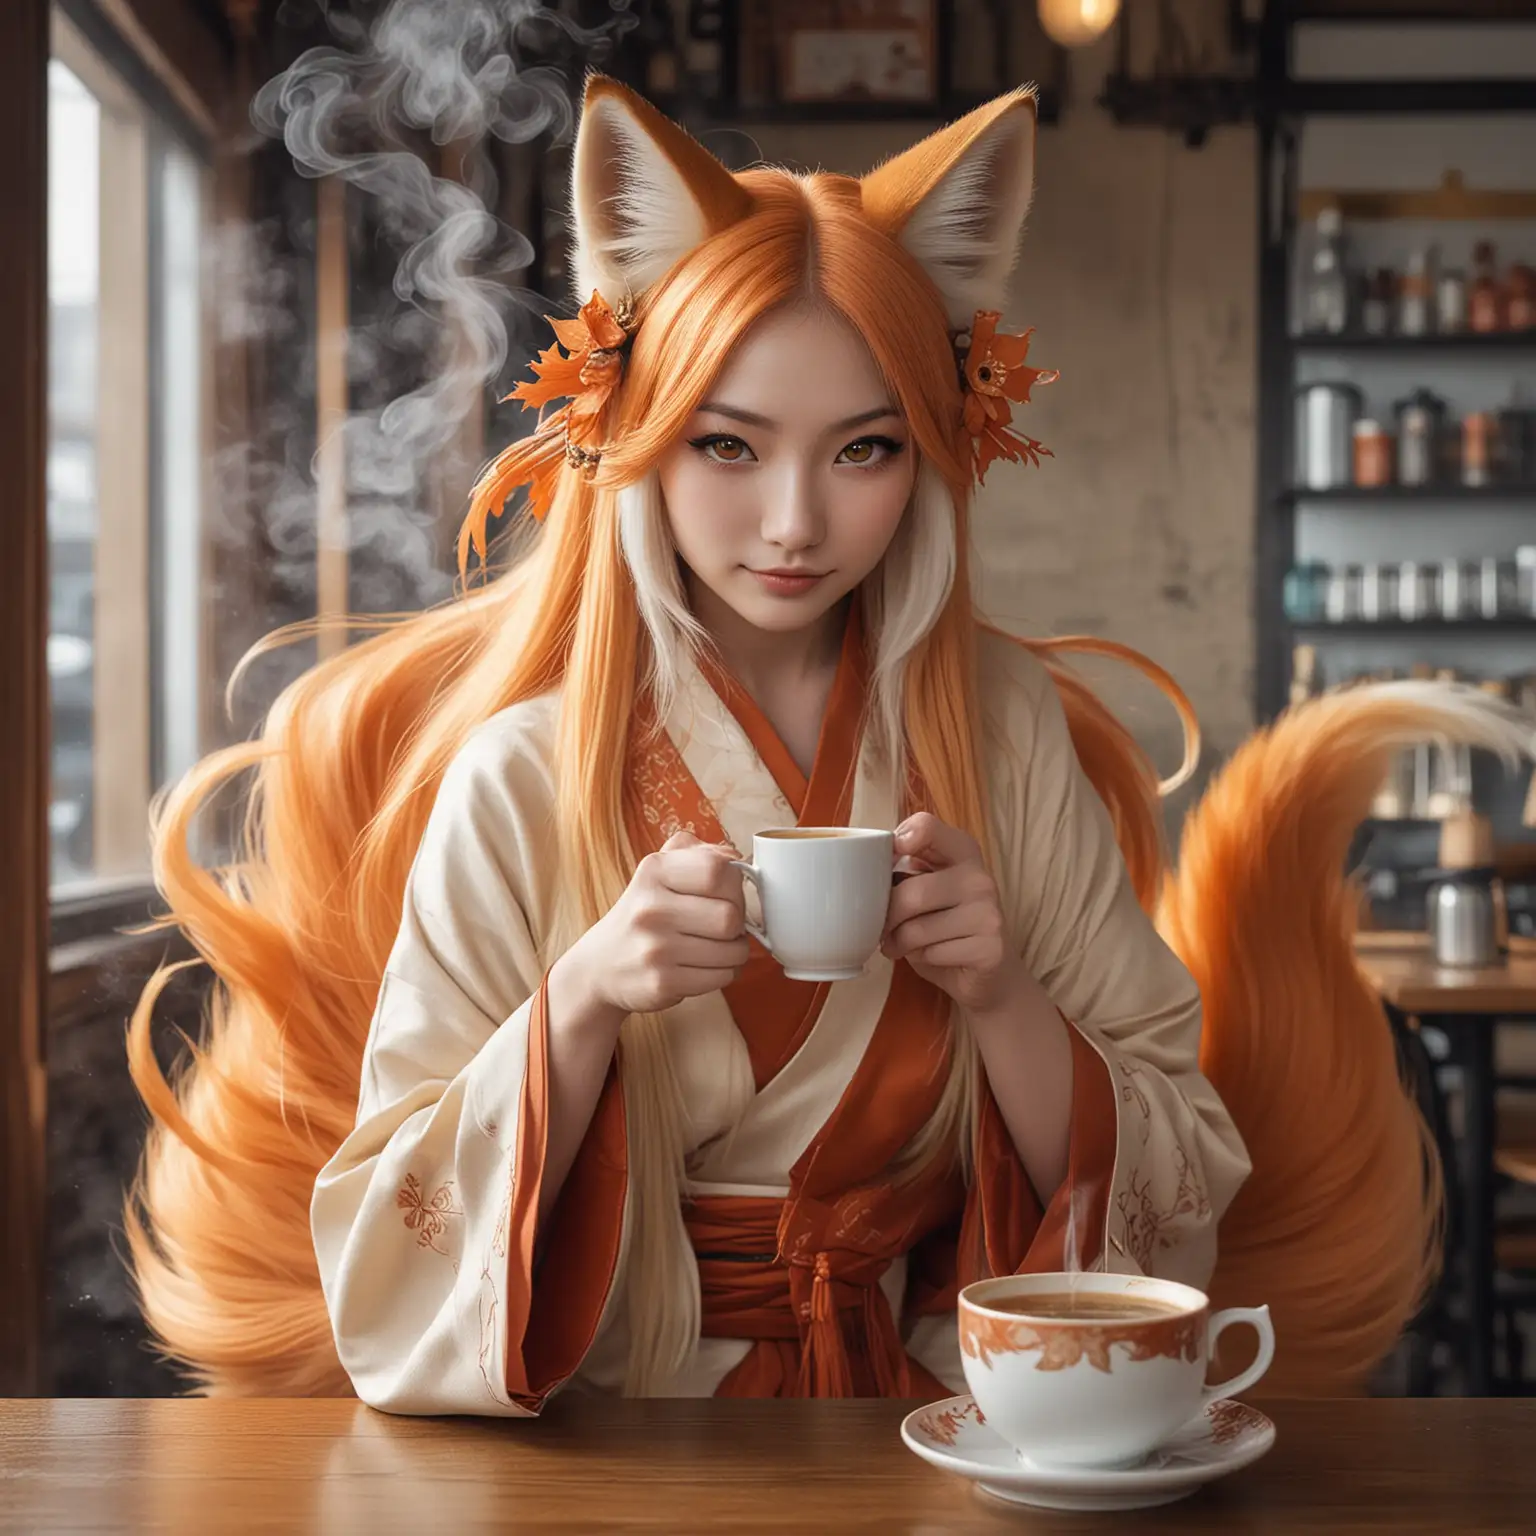 A beautiful female kitsune with nine tails. She is sat in a cafe drinking a cup of steaming coffee